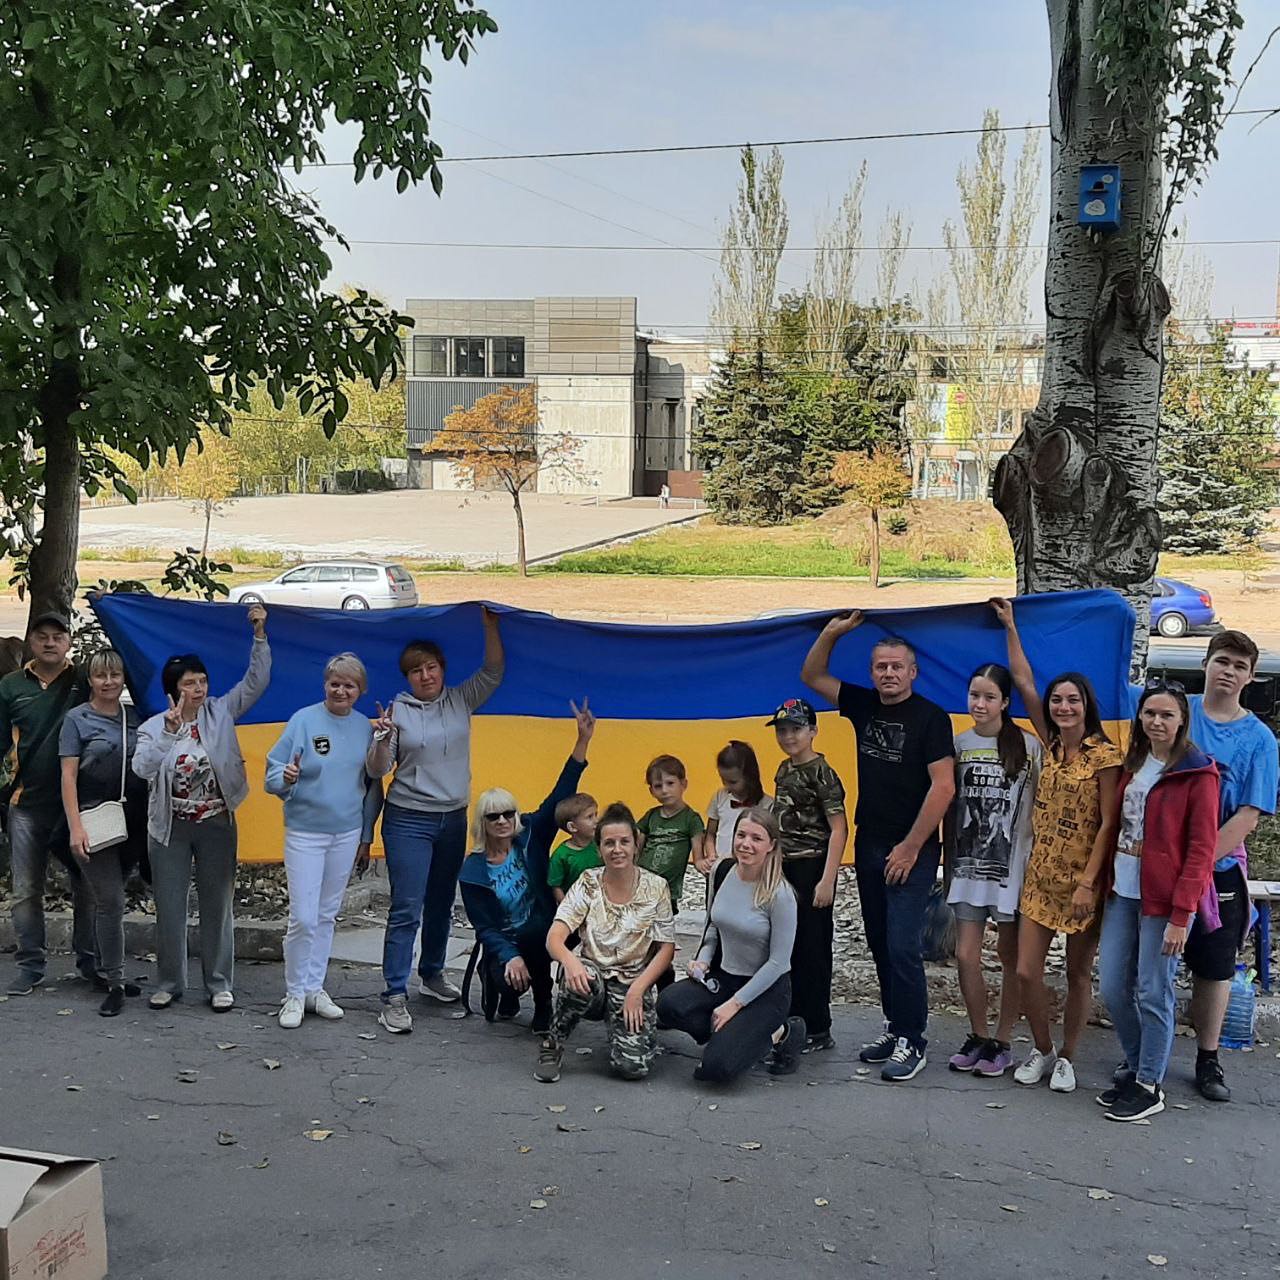 A group of people posing in front of a large ukrainian flag.